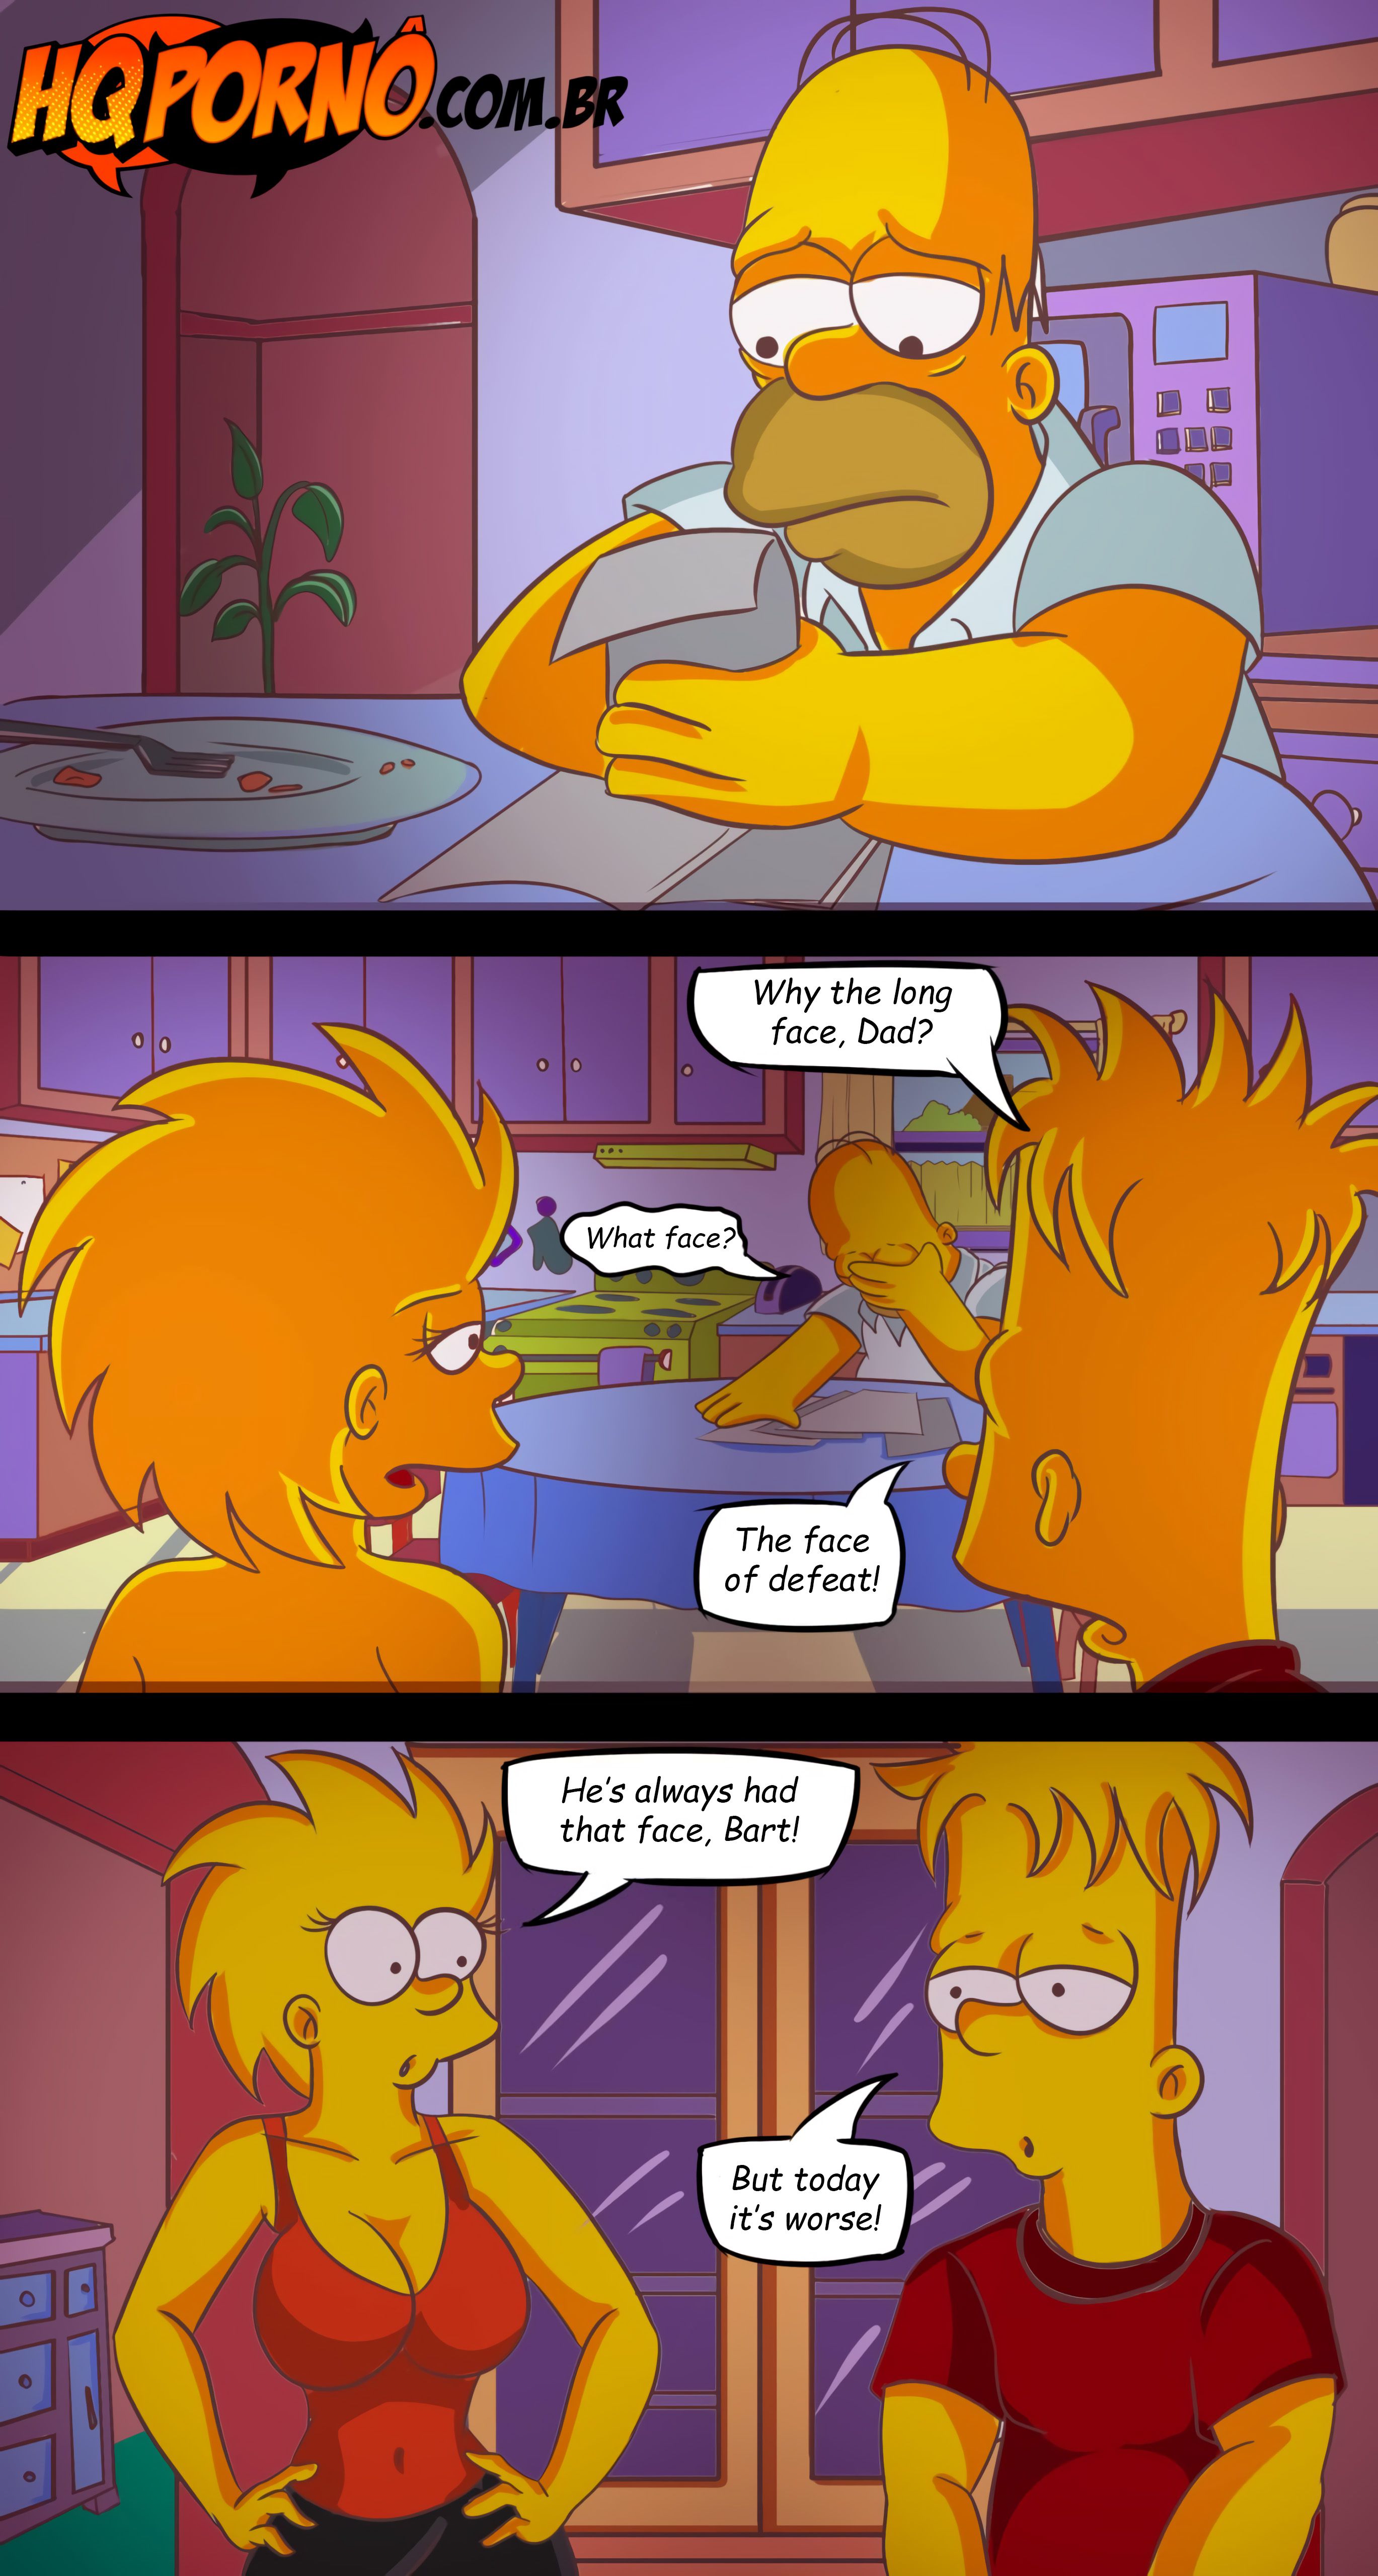 OS Simpsons (The Simpsons) [HQPorno.com.br] - 3 . OS Simpsons - Lisa The  Slut - Chapter 3 (The Simpsons) [HQPorno.com.br] - AllPornComic